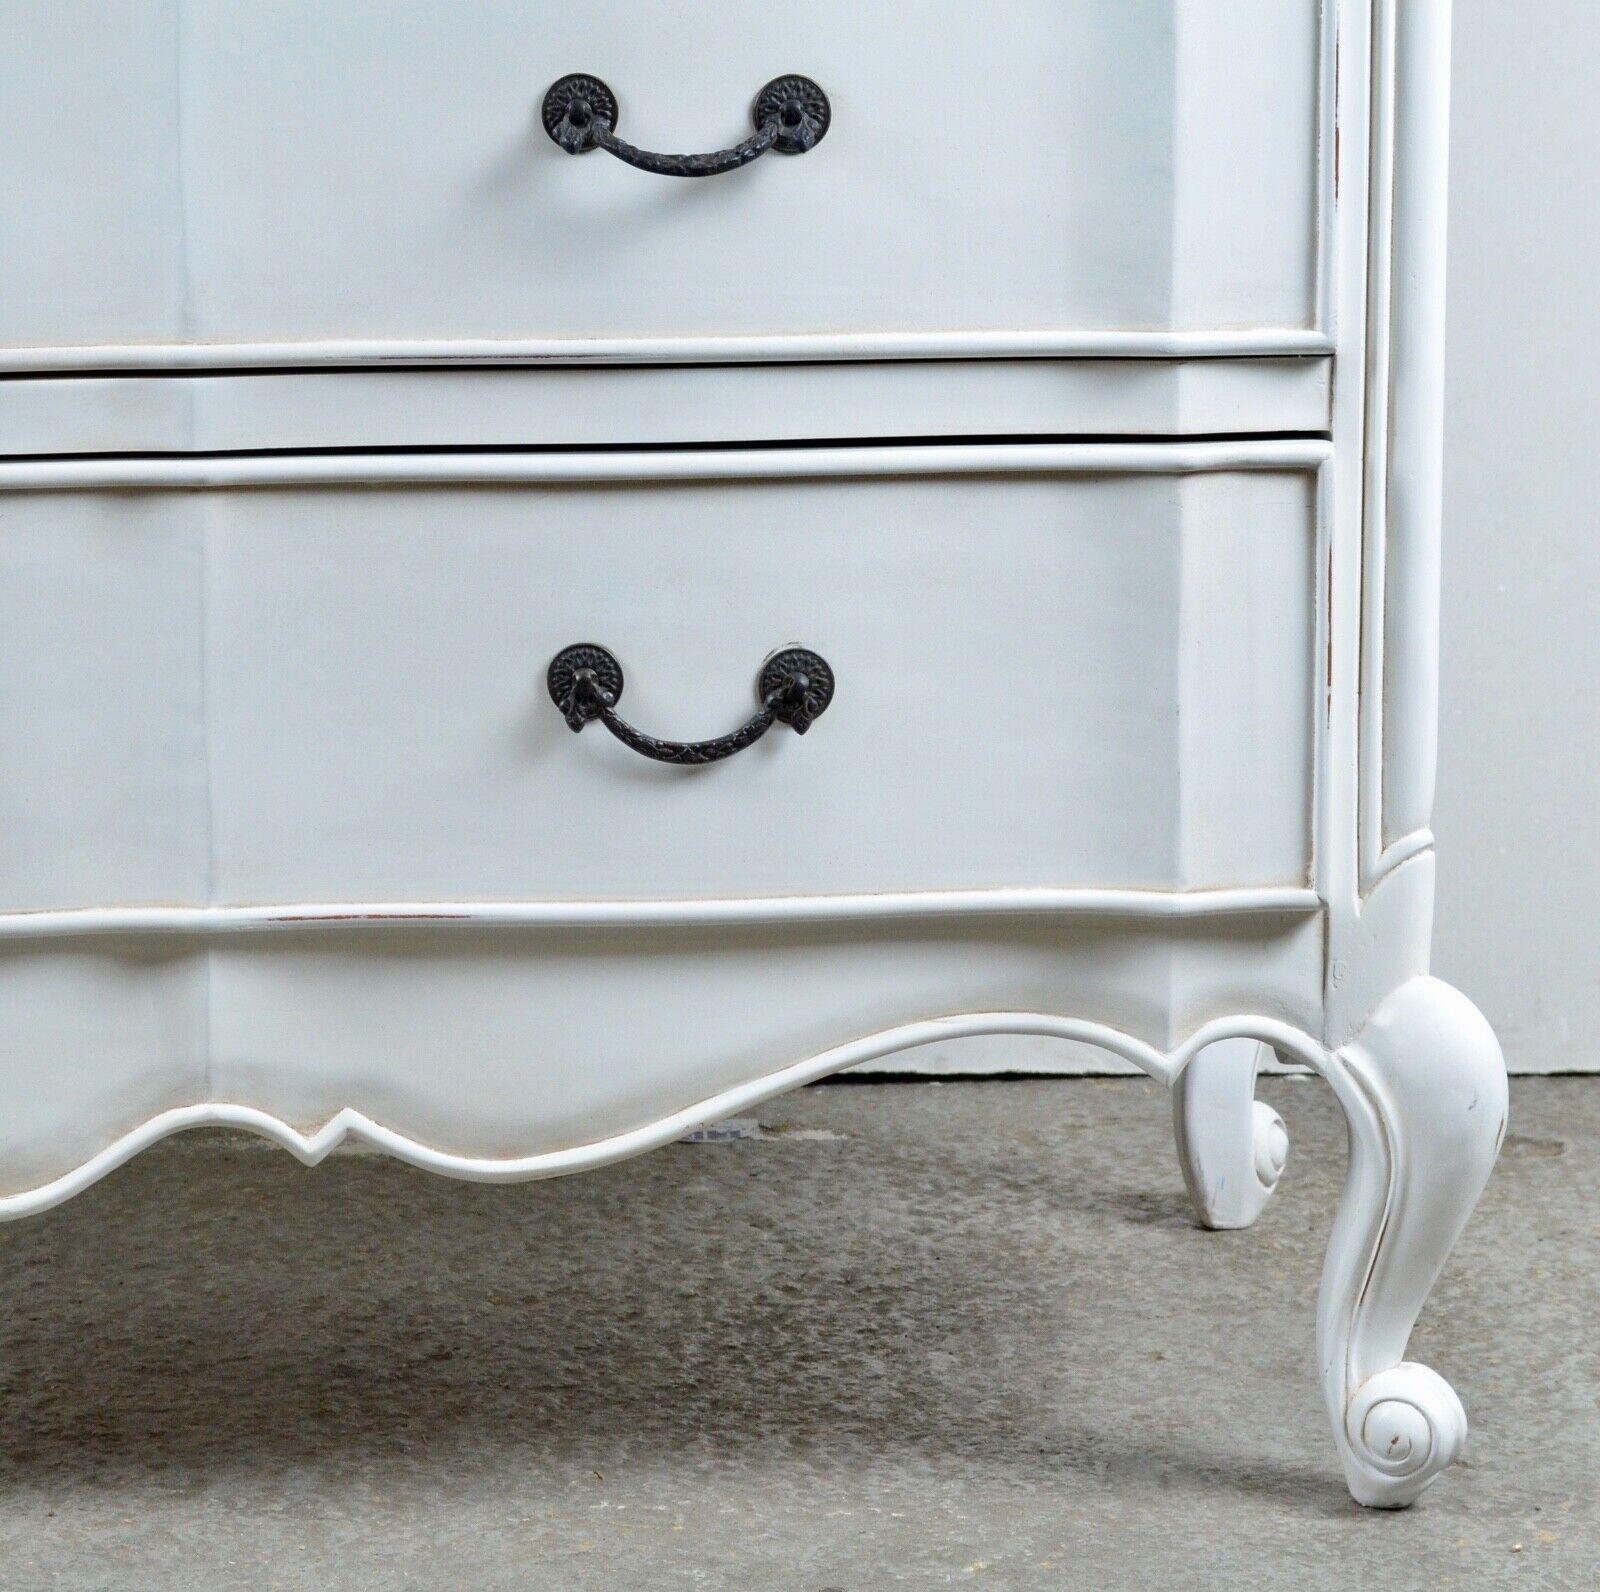 Hand-Crafted Luxury Hand Finished in a Lightly Distressed Antique White Chest of Drawers